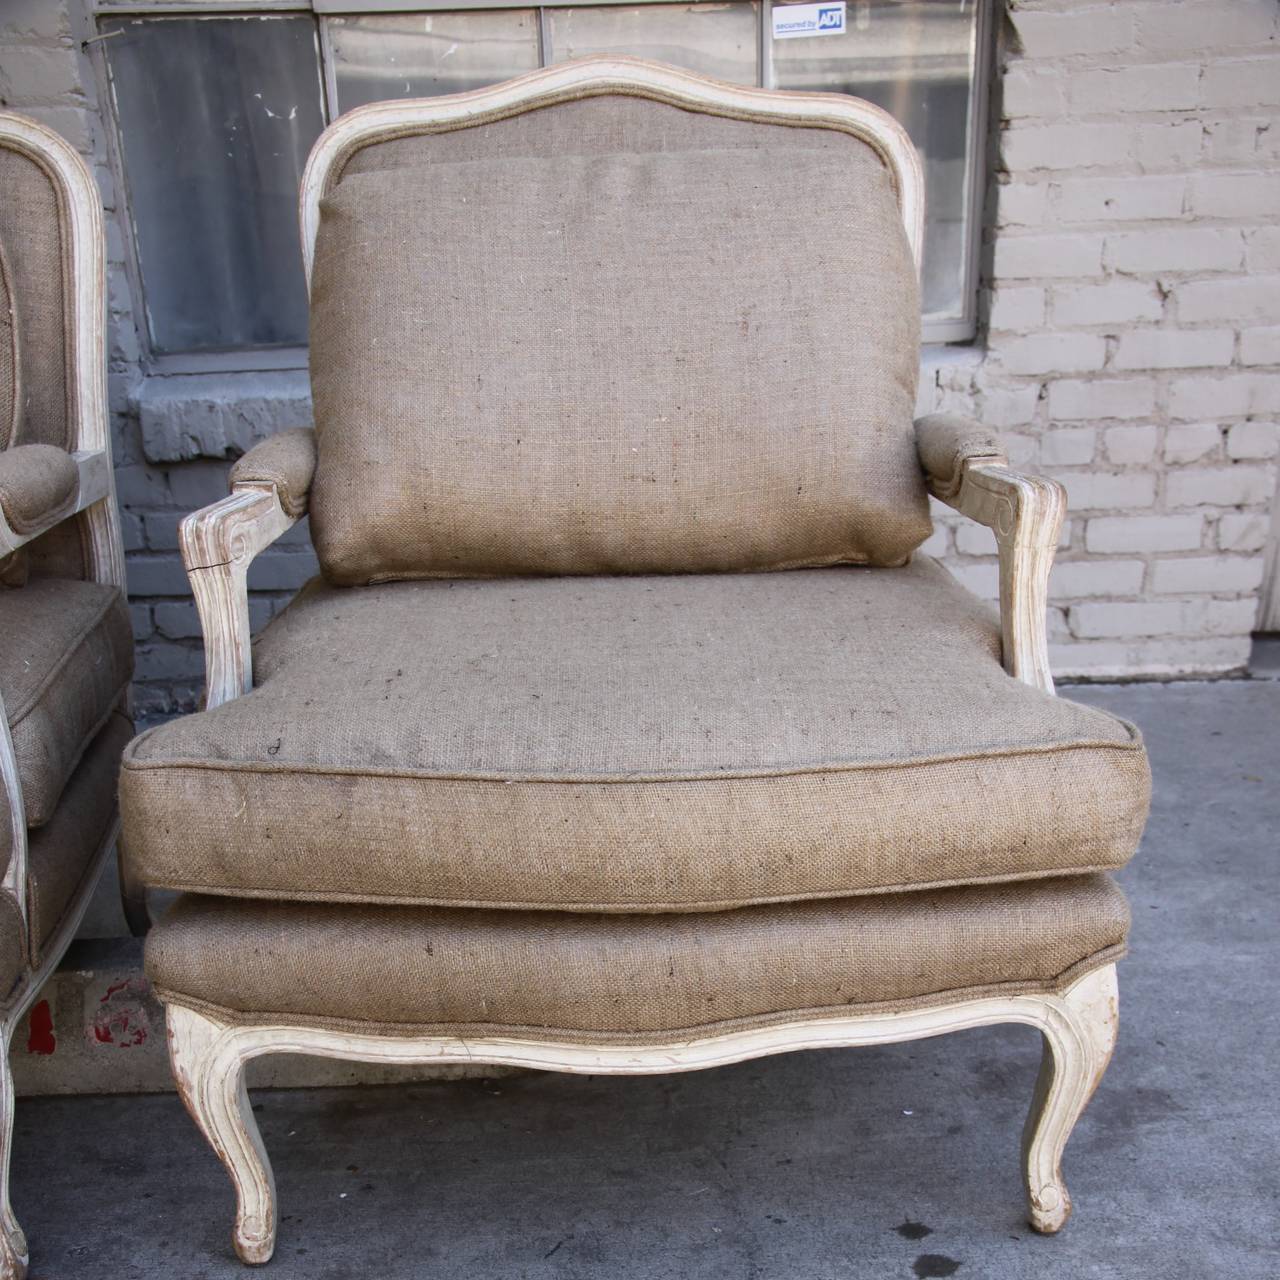 Pair of painted Louis XV style bergere newly upholstered in burlap textile with loose seat and back cushions.